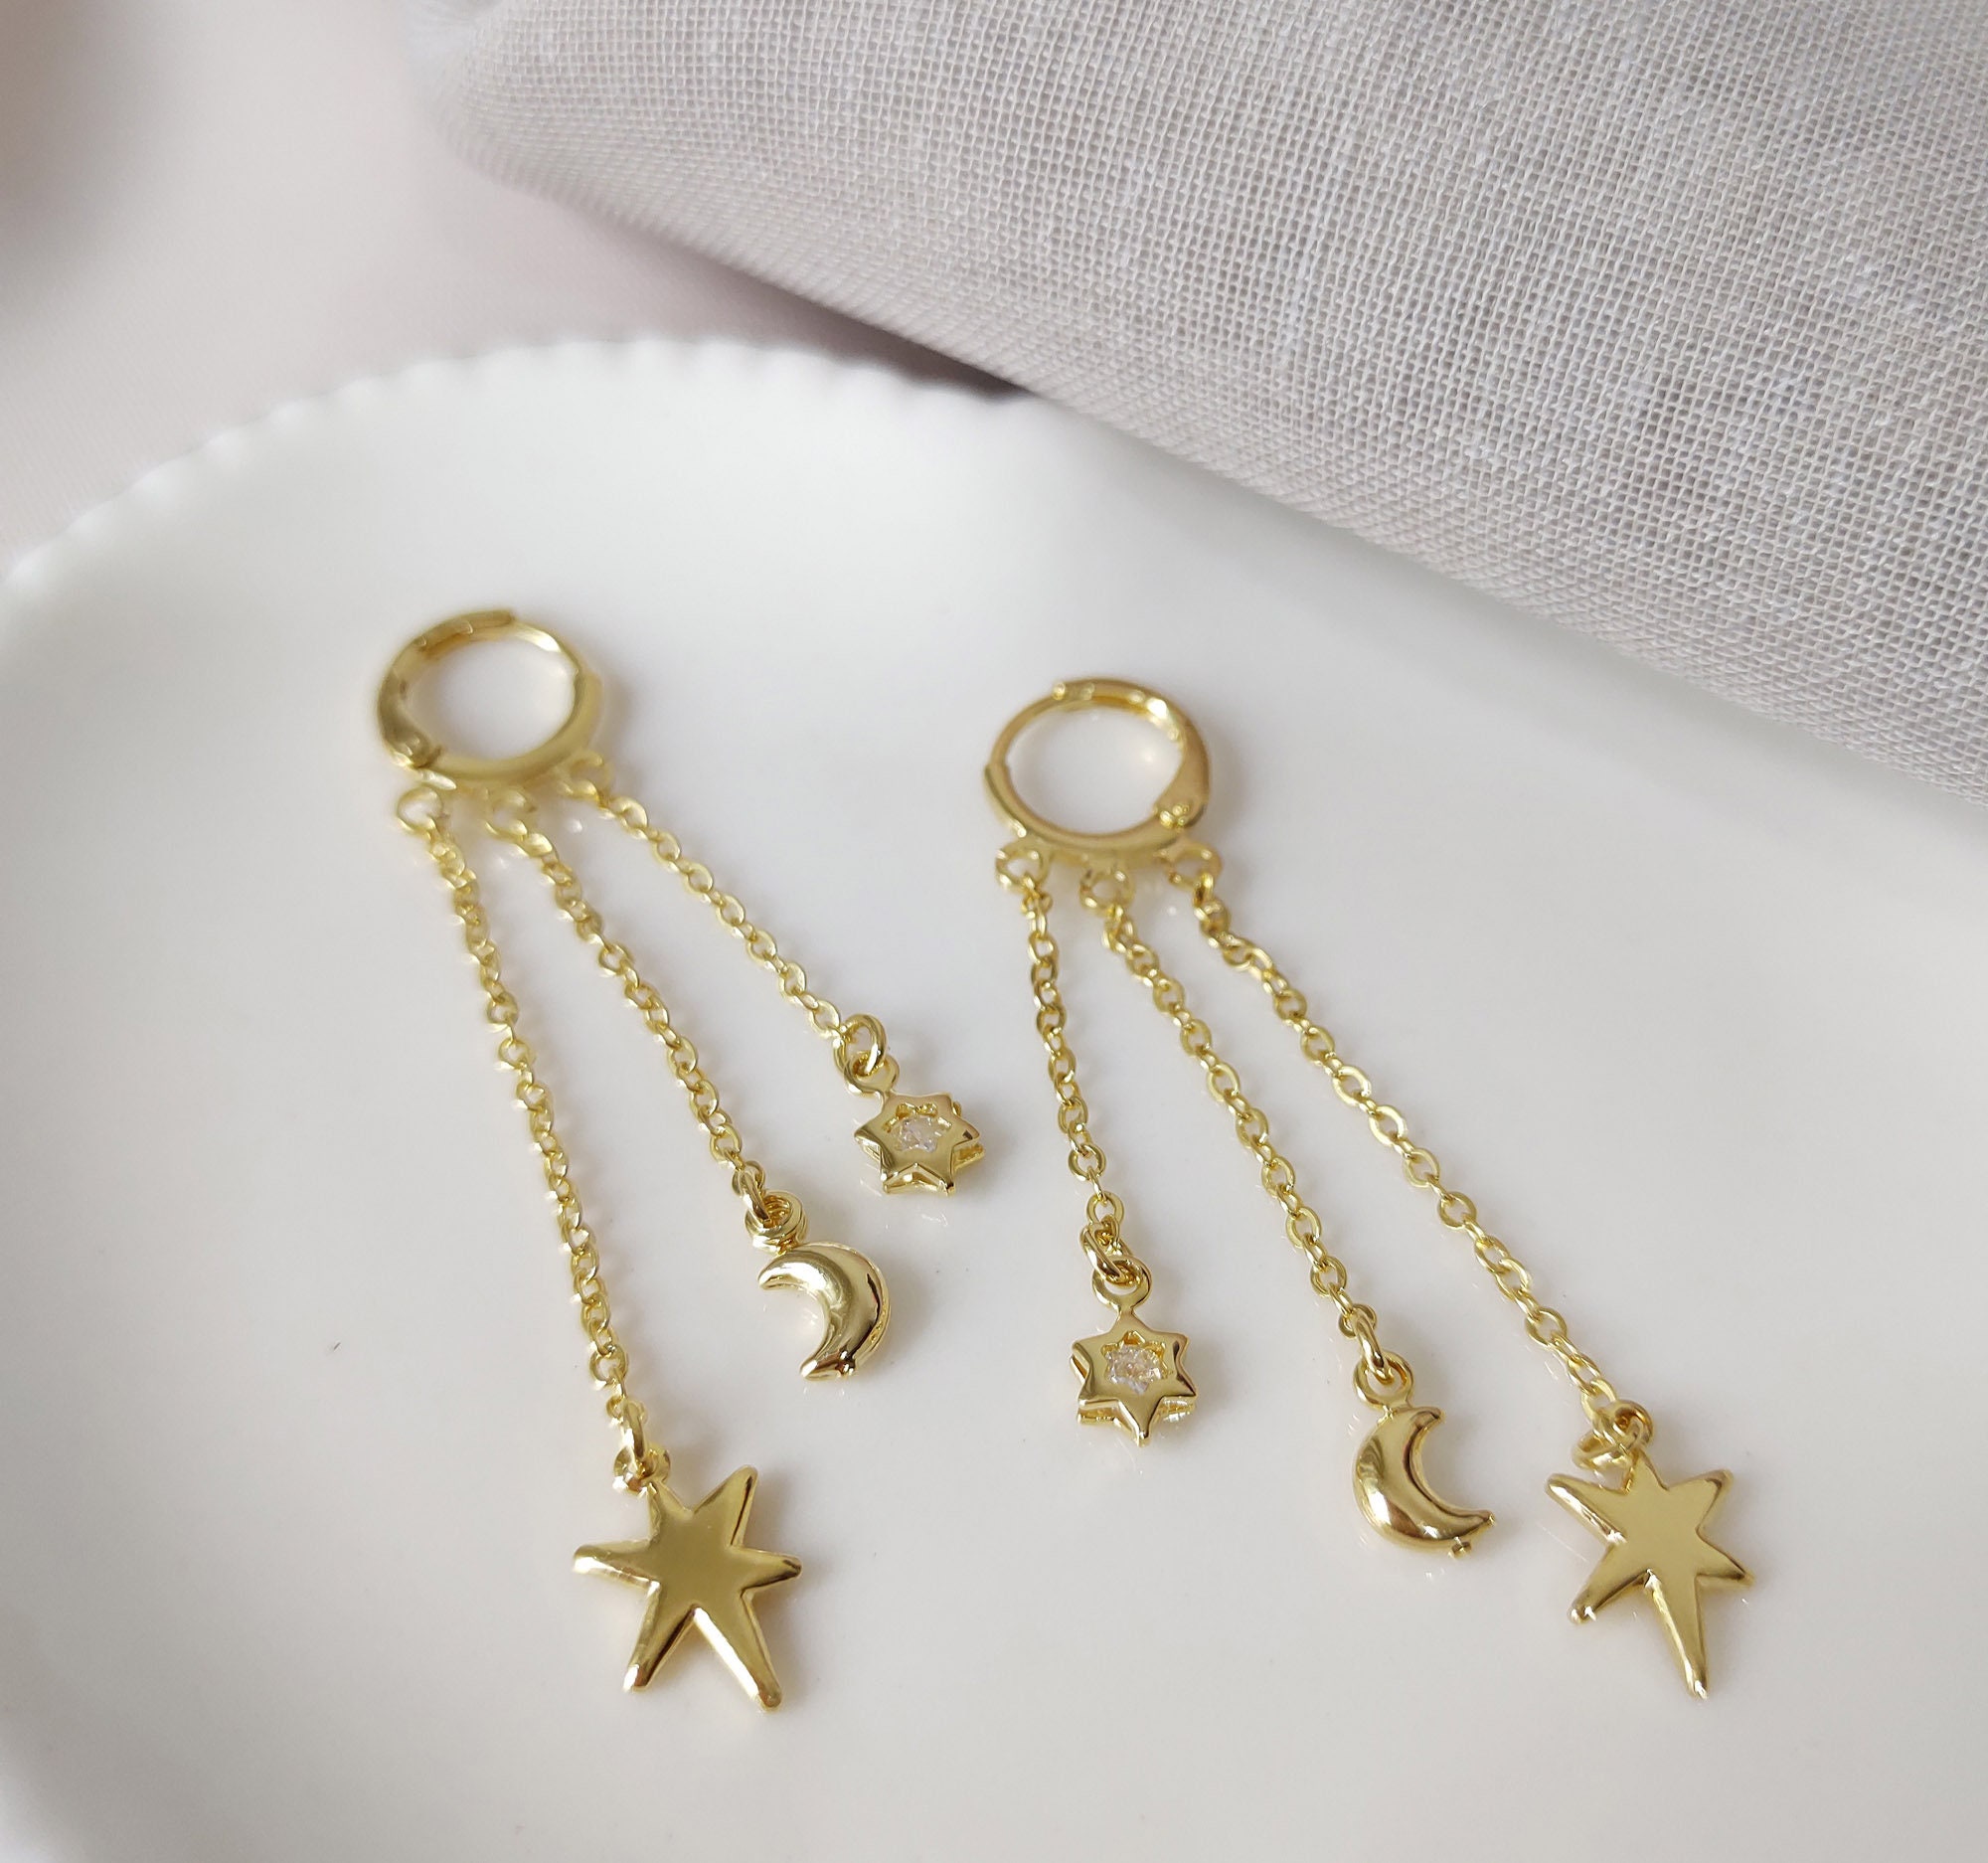 Light Weight Earrings: Elevating Style and Comfort - Clean Origin Blog